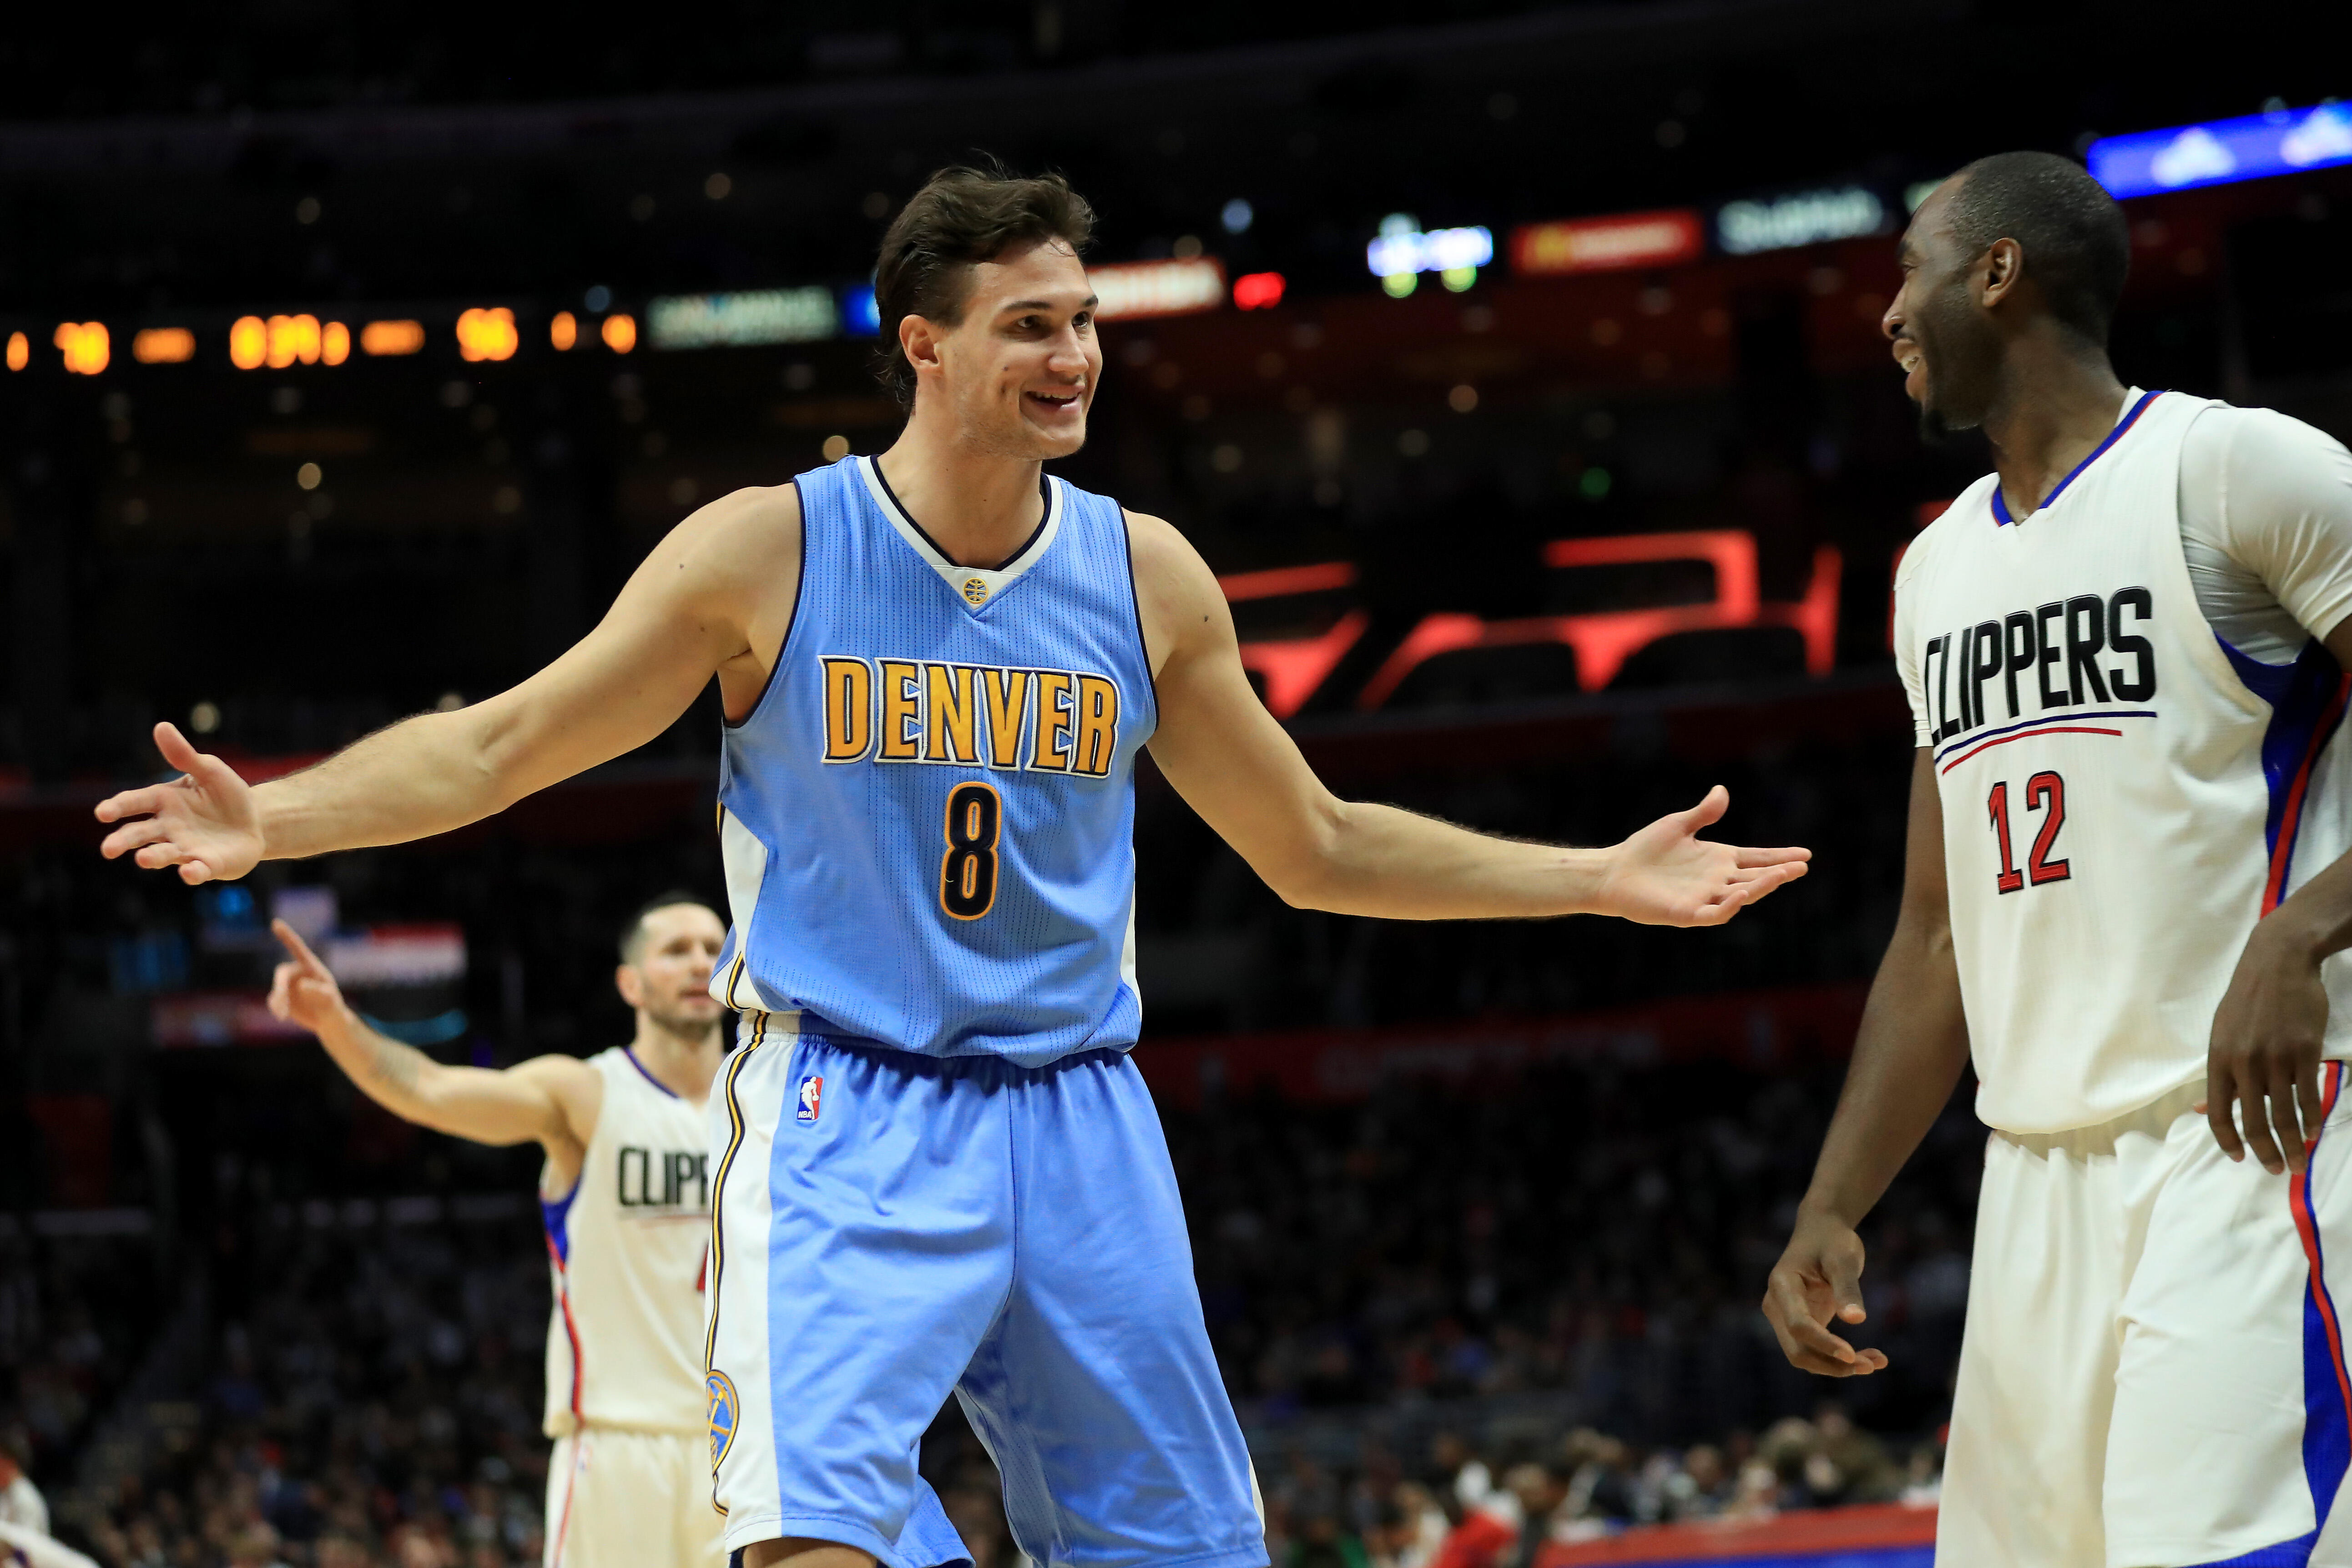 LOS ANGELES, CA - DECEMBER 20:  Danilo Gallinari #8 of the Denver Nuggets gestures to Luc Mbah a Moute #12 of the LA Clippers during the second half of a game at Staples Center on December 20, 2016 in Los Angeles, California.   NOTE TO USER: User expressl